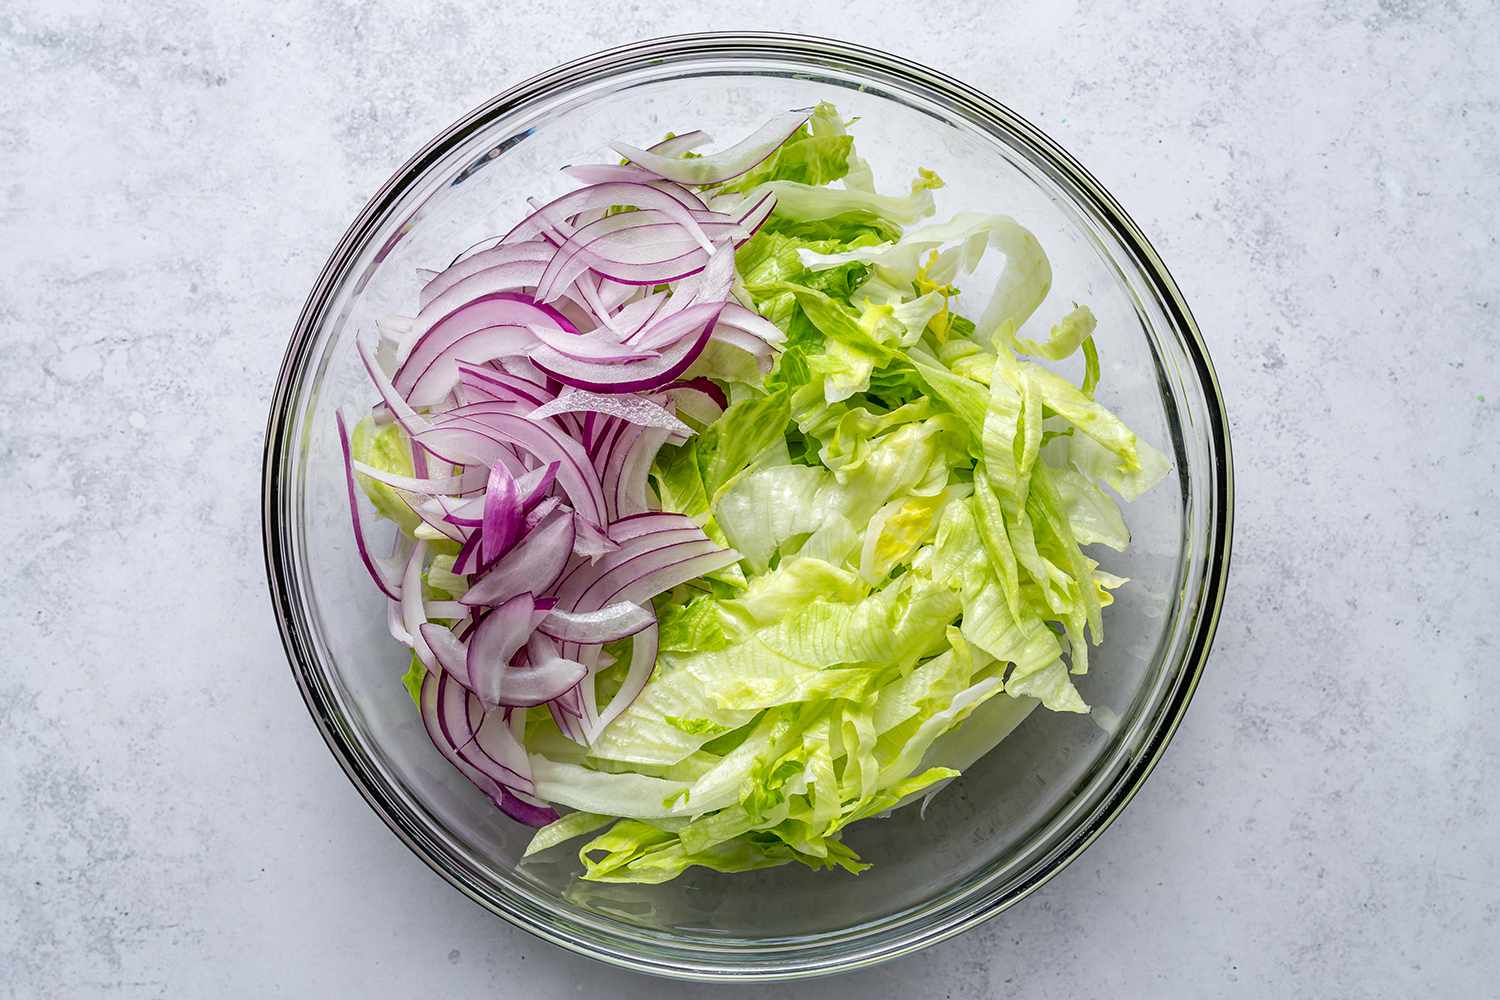 Sliced lettuce and onions in a bowl